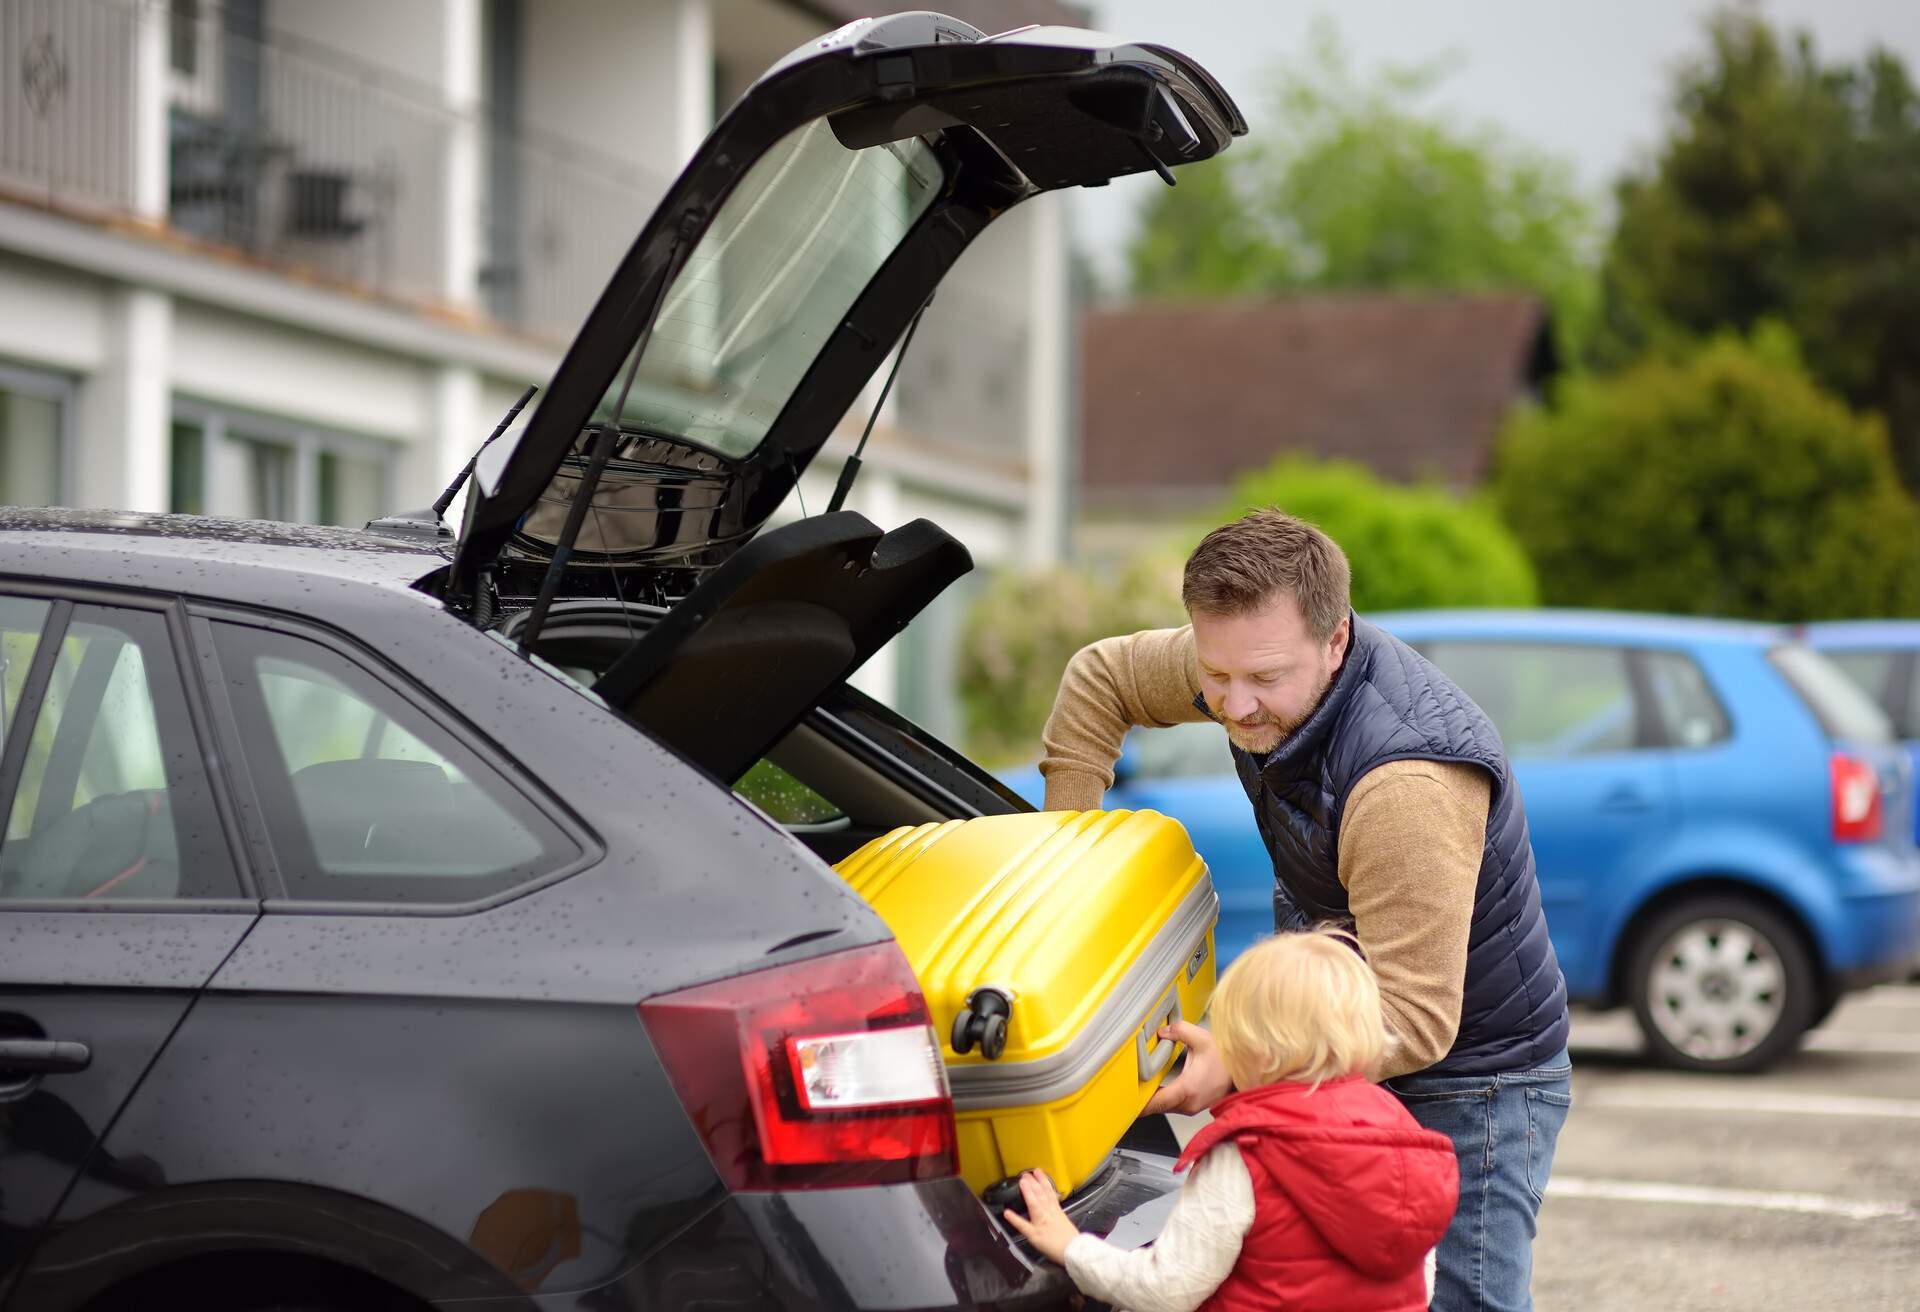 A man and a child putting a suitcase in the trunk of a rental car